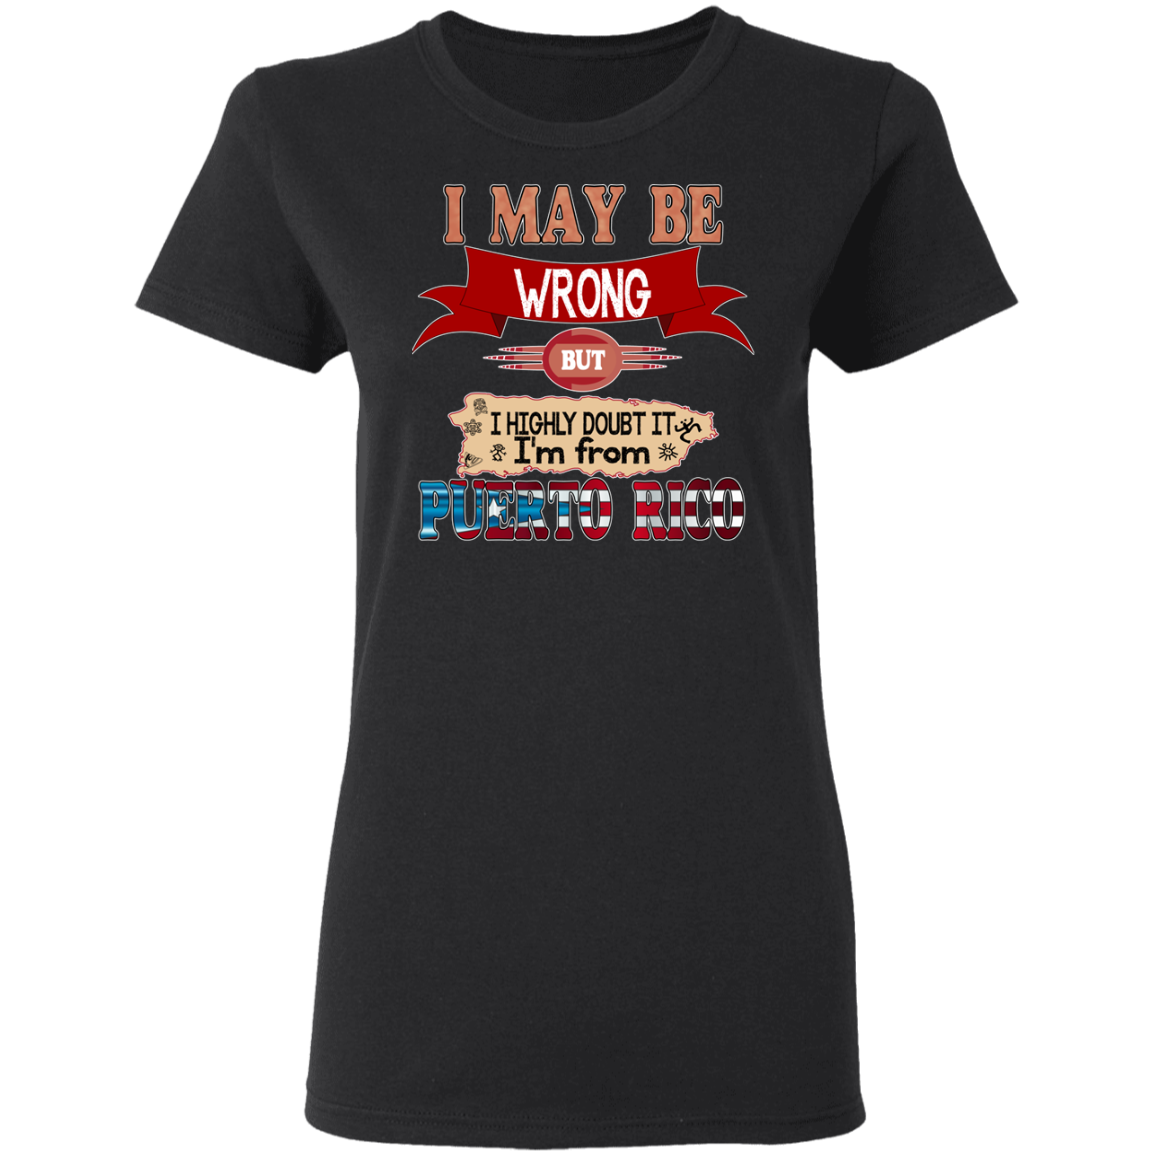 My Be Wrong But Doubt It - 5.3 oz. T-Shirt - Puerto Rican Pride